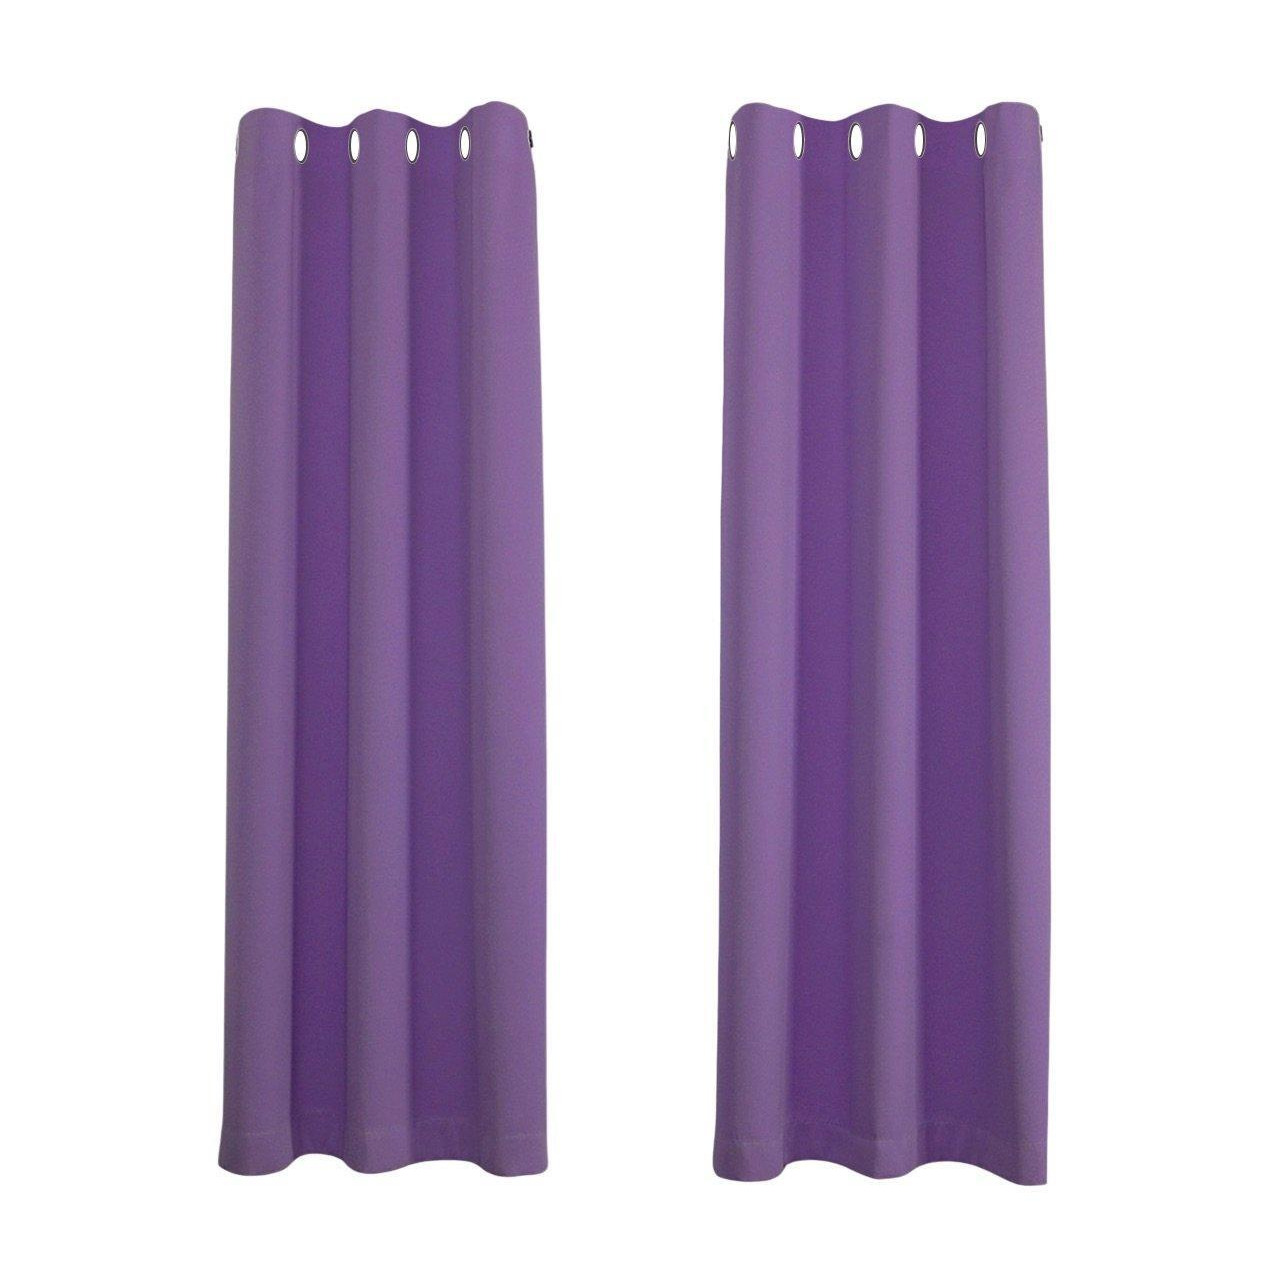 High Quality Polyester Room Darkening Curtains - Eyelet Thermal Curtain 2 Panel Pair - image 1